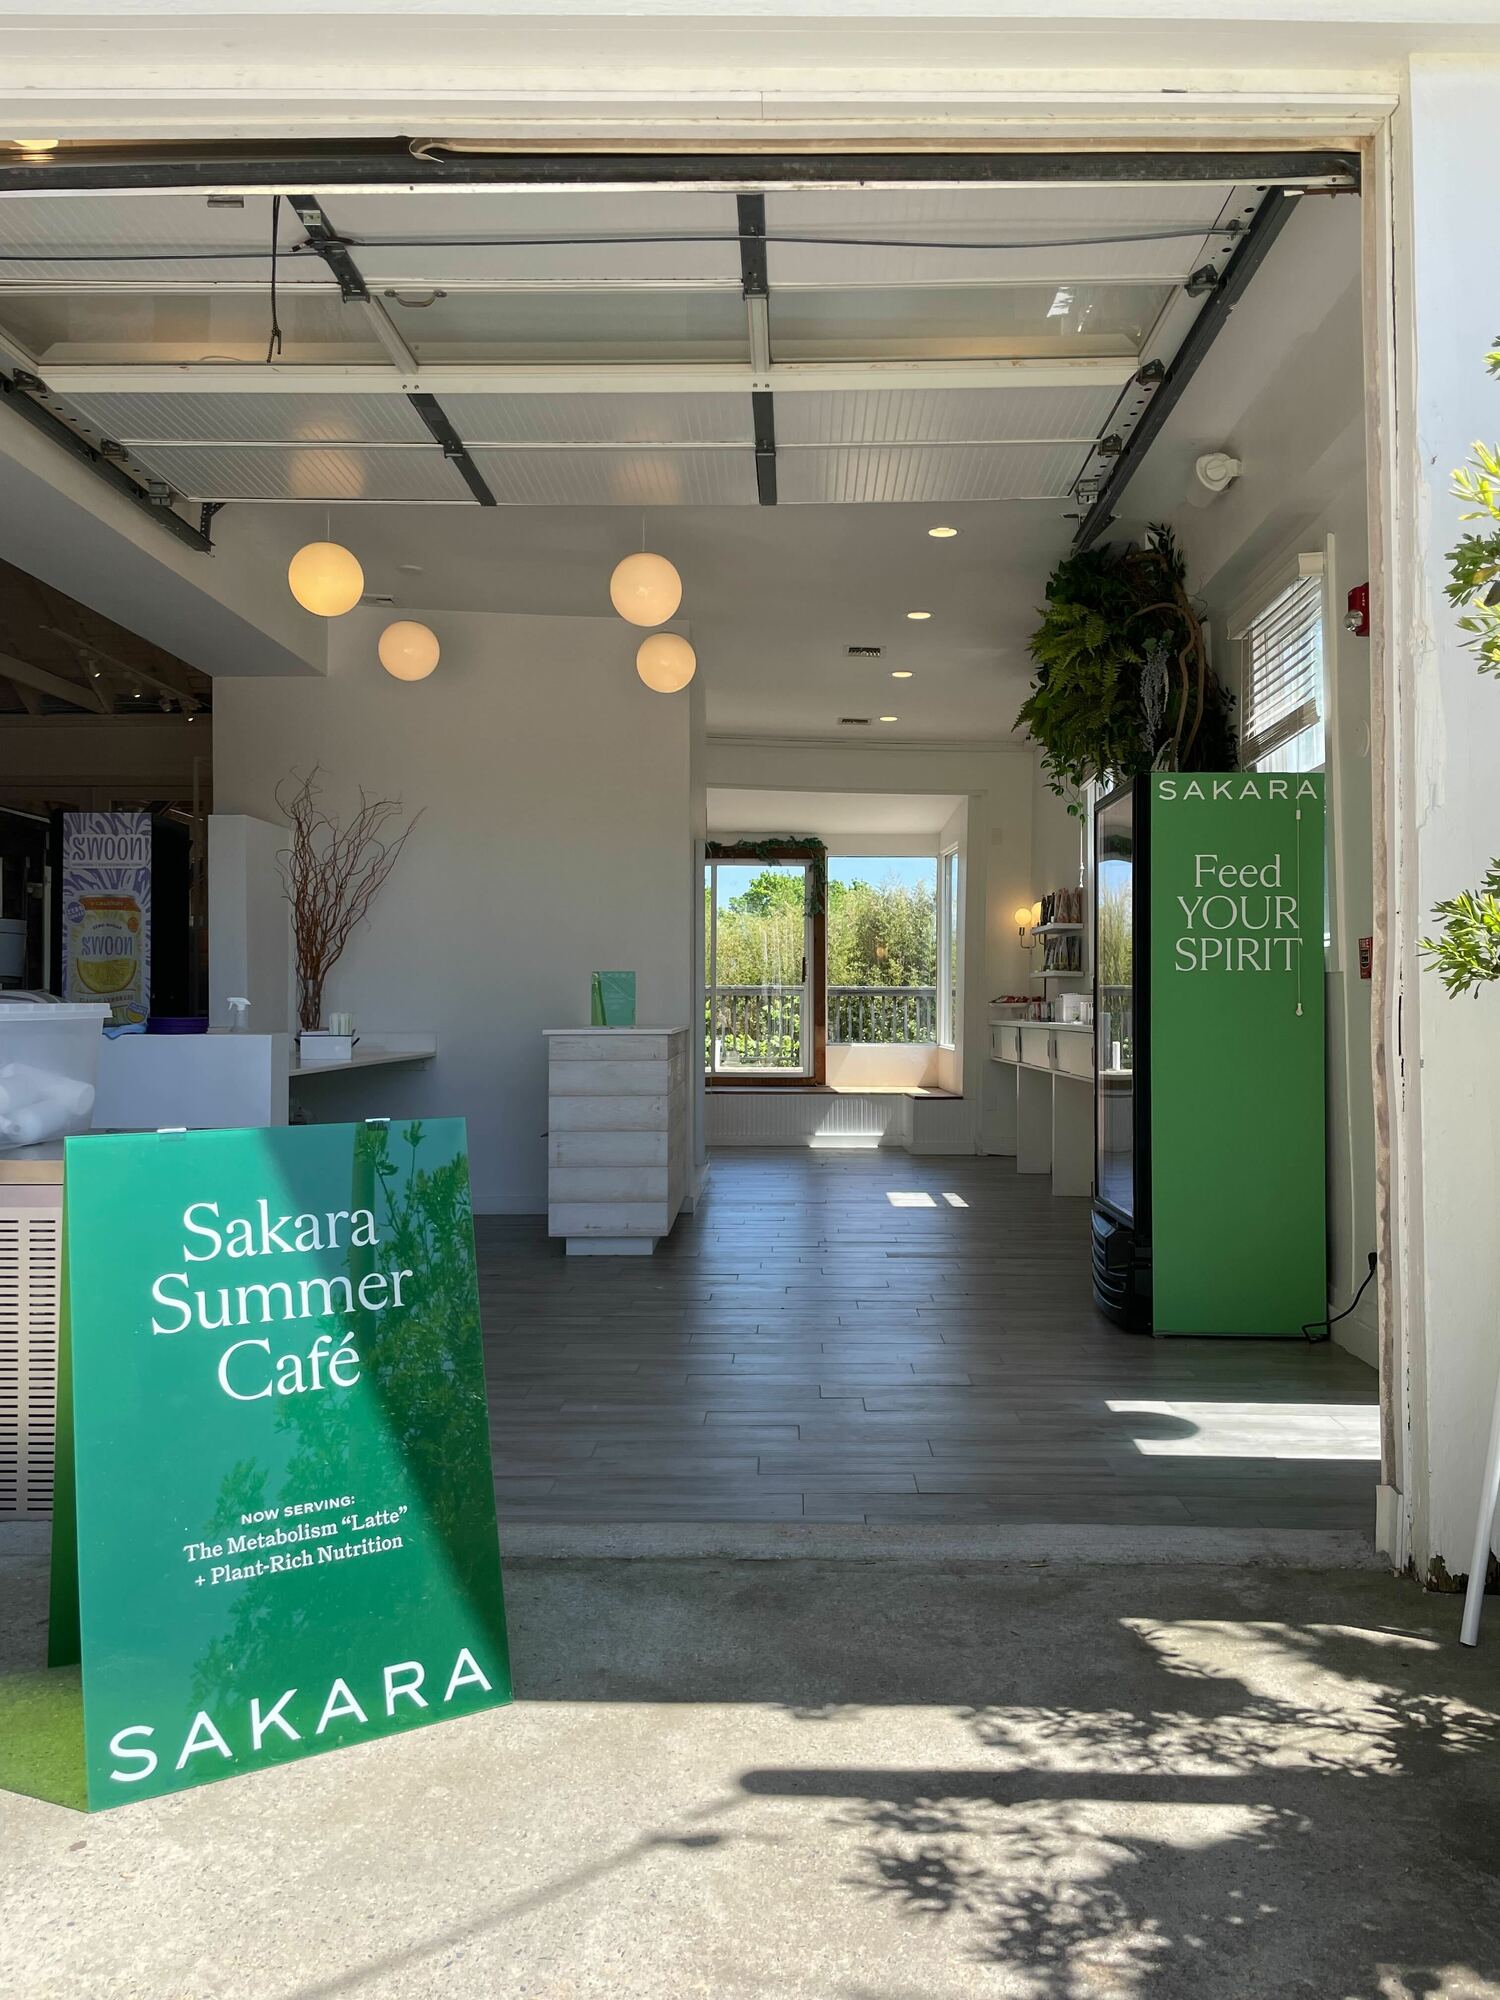 Sakara, the plant-based meal delivery service, is popping up this summer and will sell products at The Barn in Bridgehampton in partnership with SoulCycle. COURTESY SAKARA